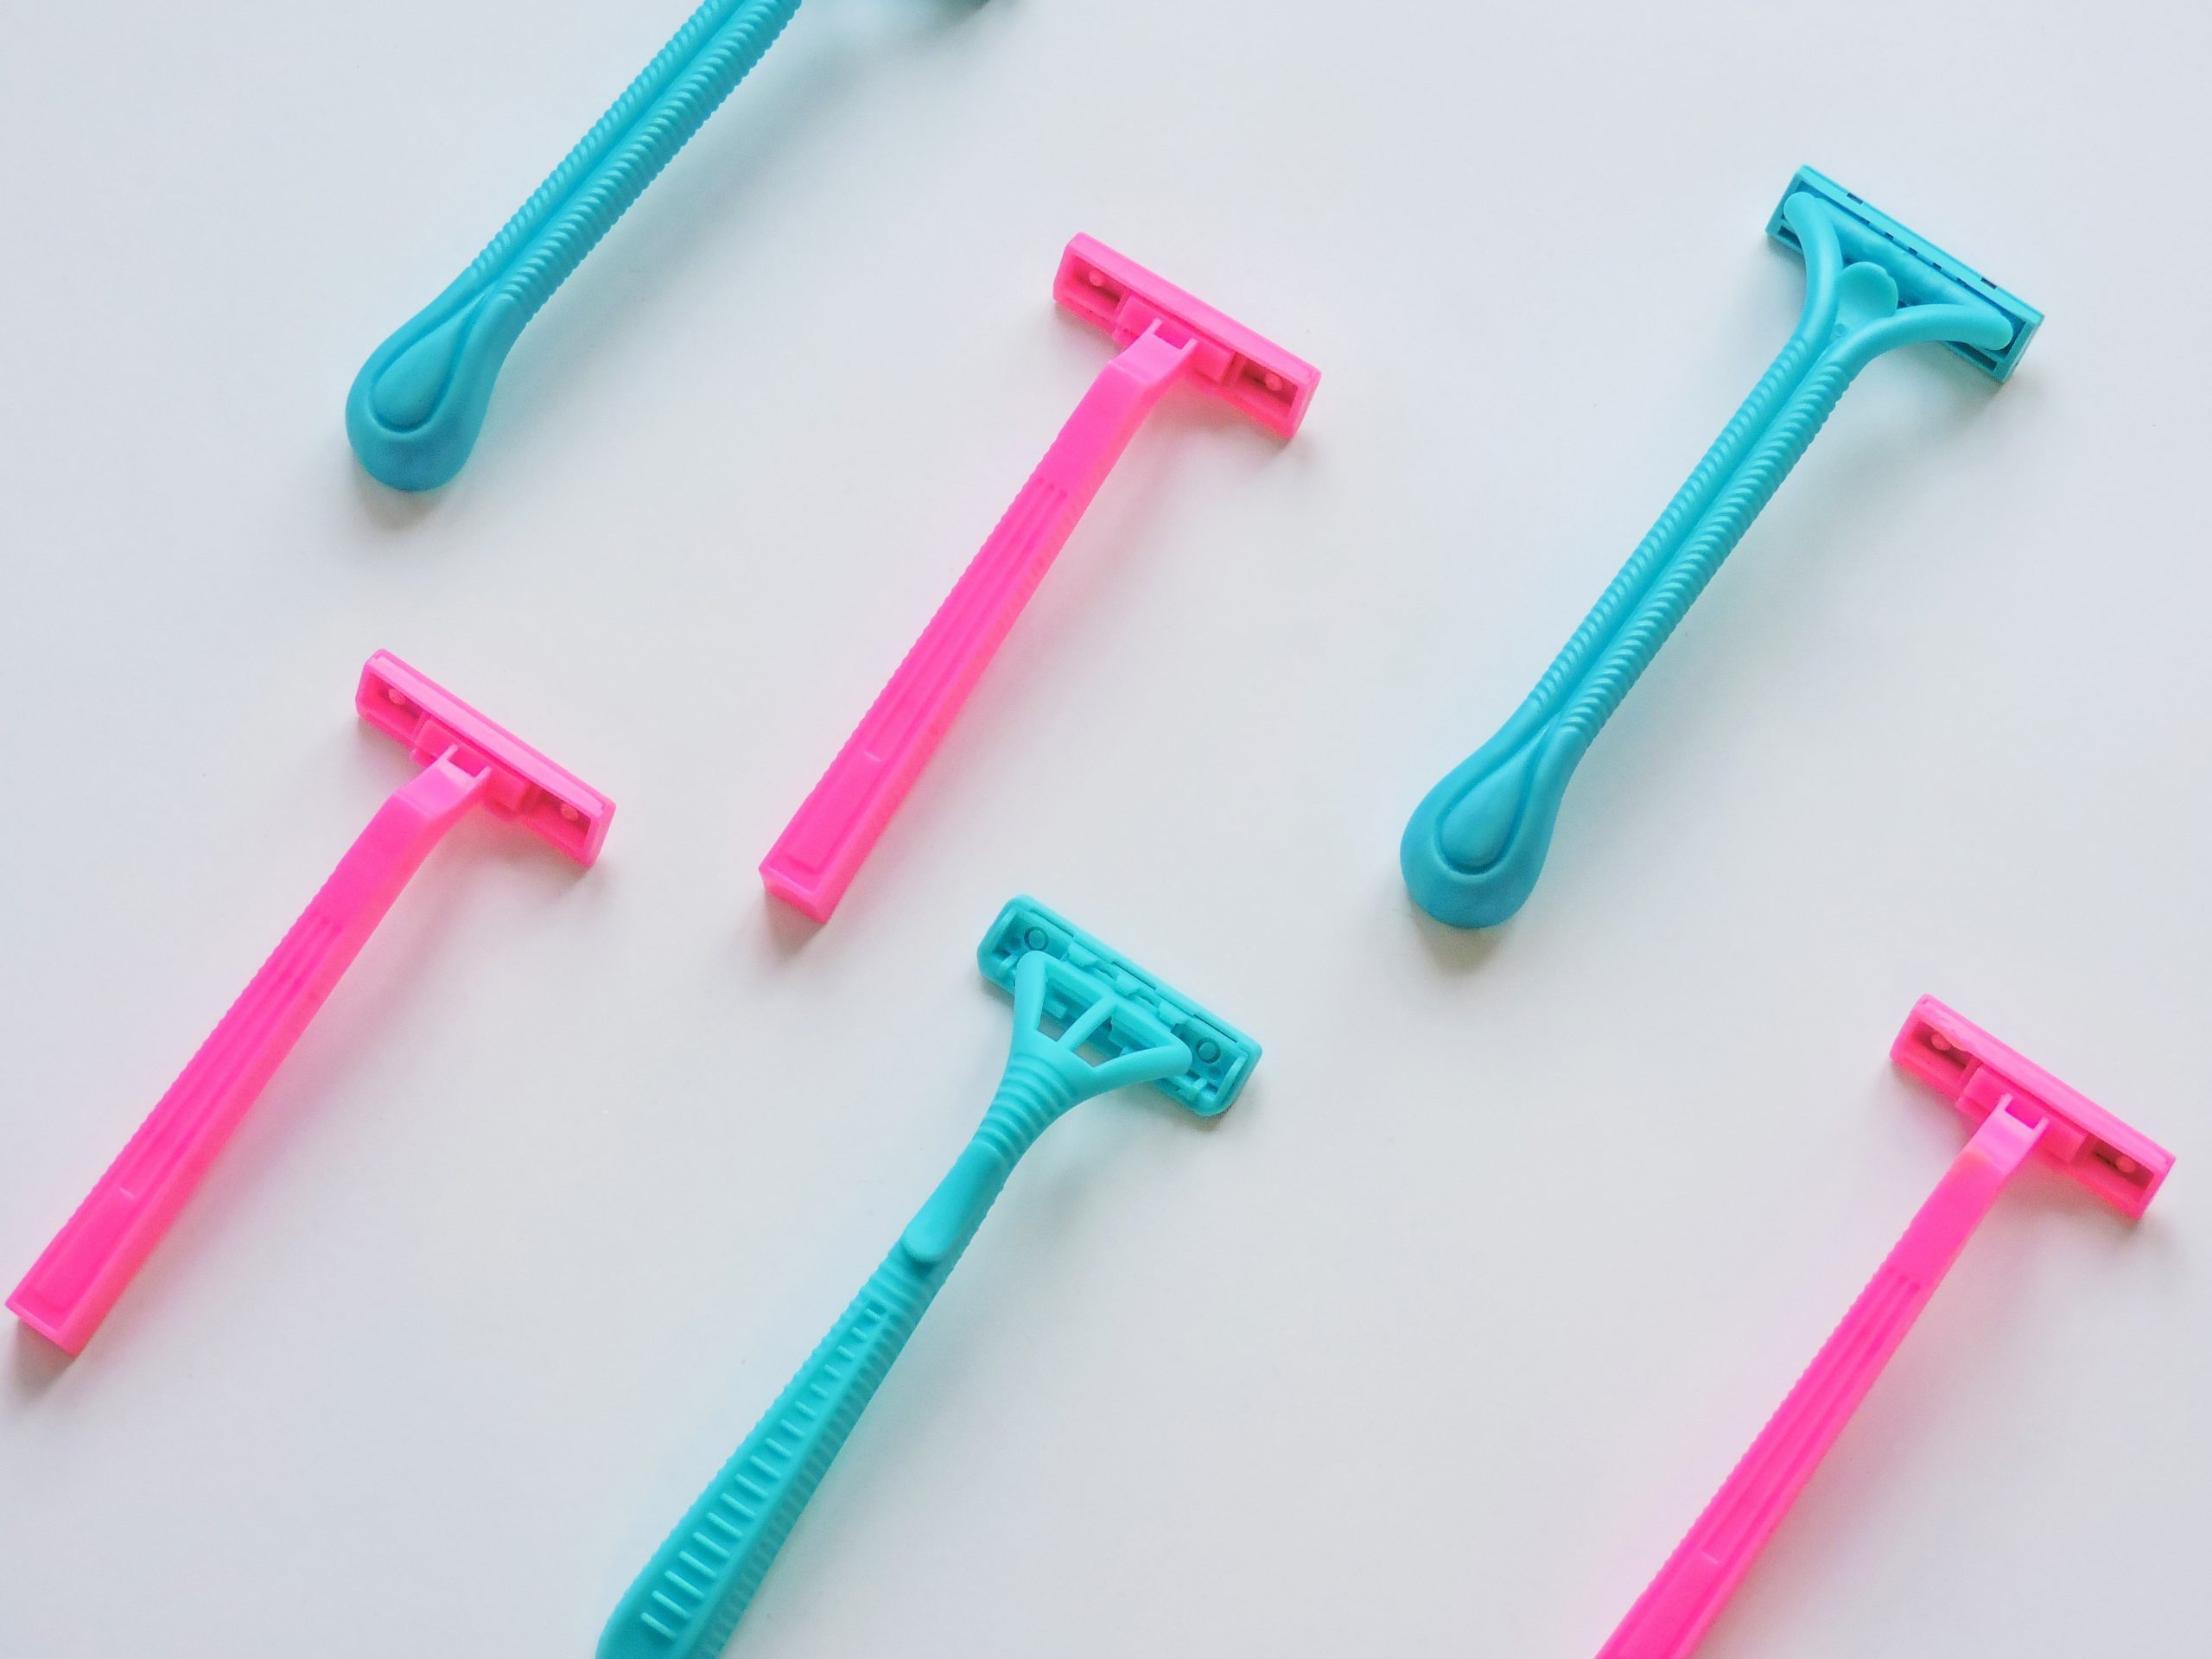 Men's and Women's Razors: What's the Difference? | Reader's Digest